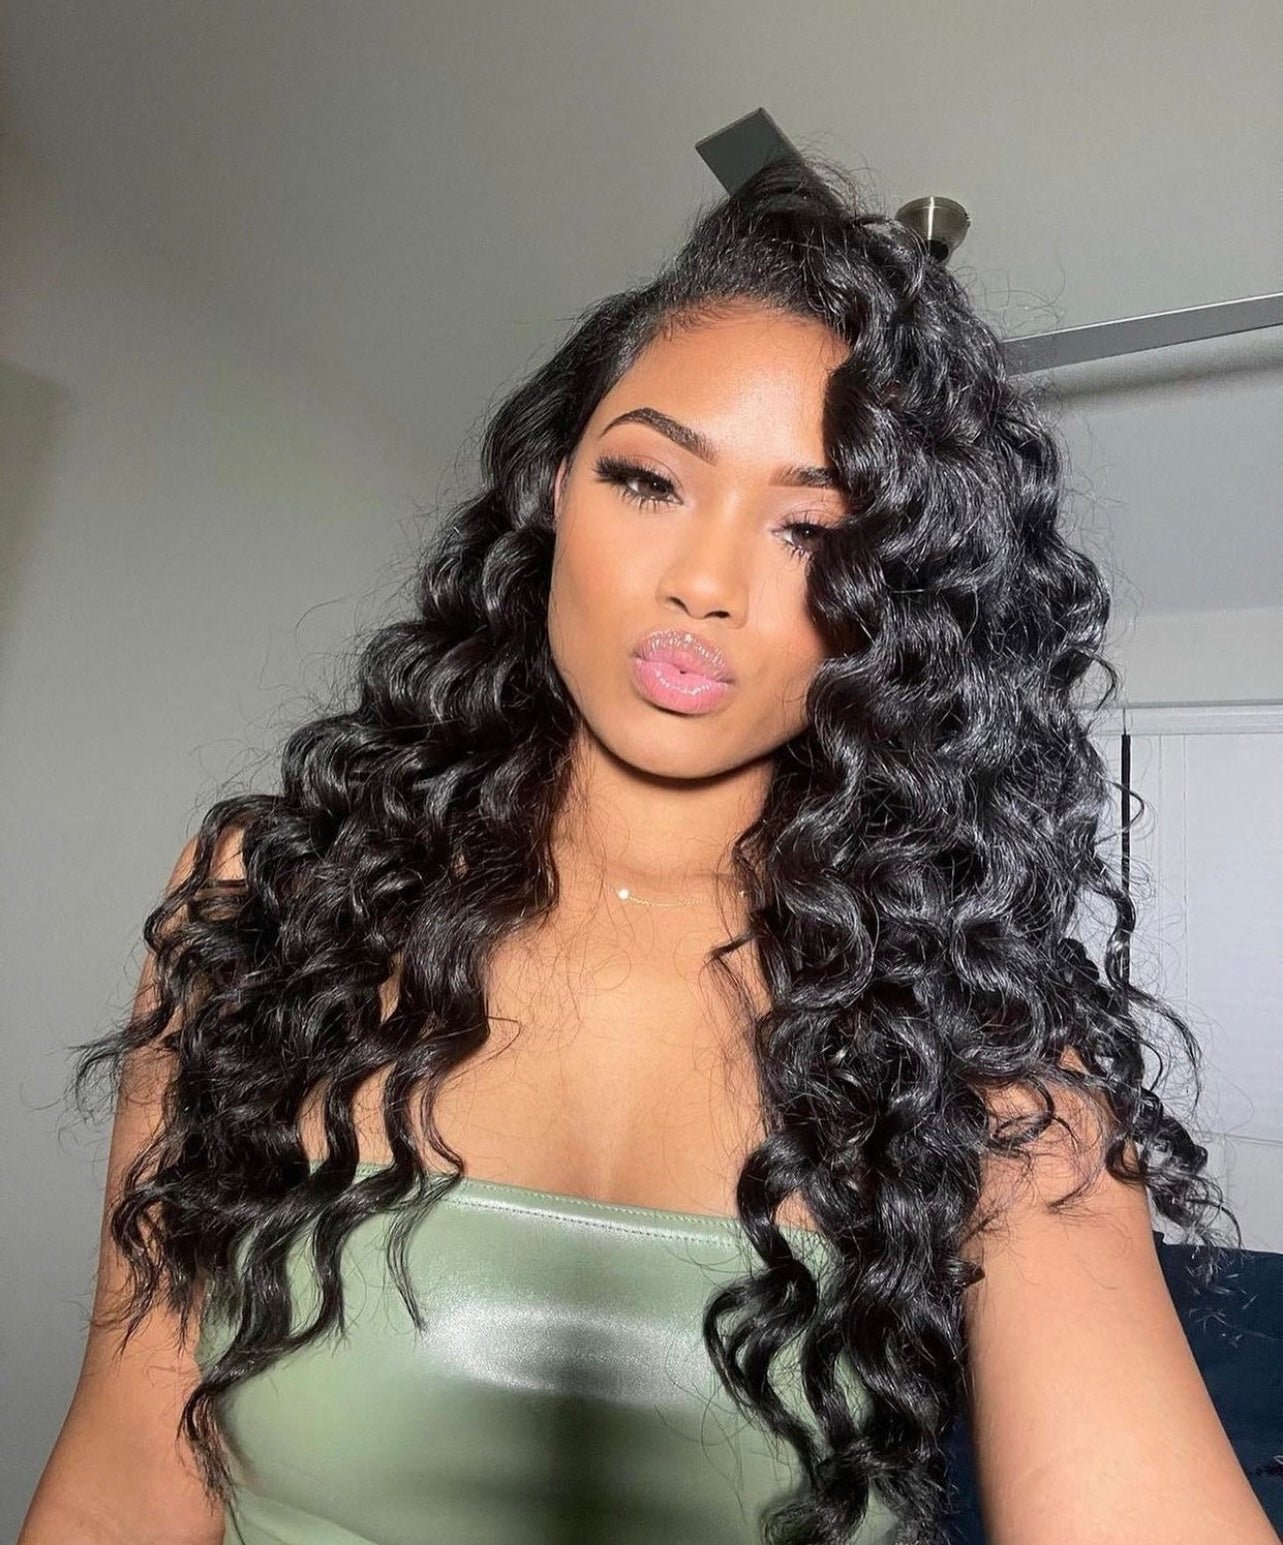 Brazilian Body Wave Hair 4x4 Lace Closure Wig – SPI Styles